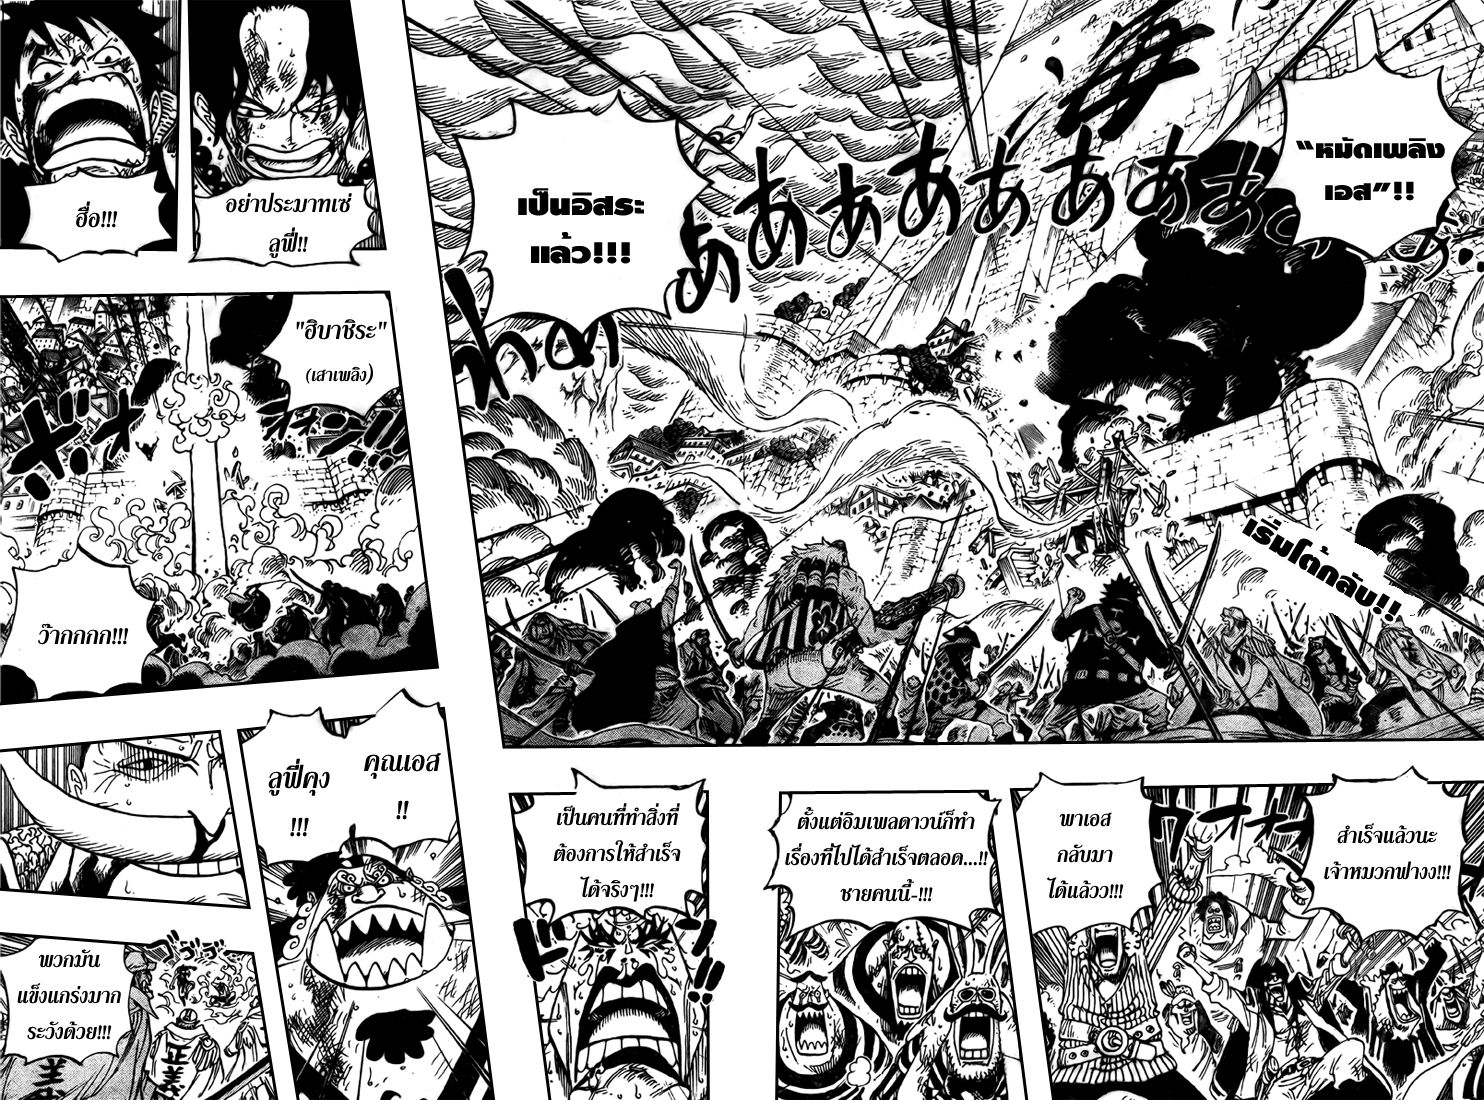 Manga Thai League One Piece 572 The Times They Are A Changin